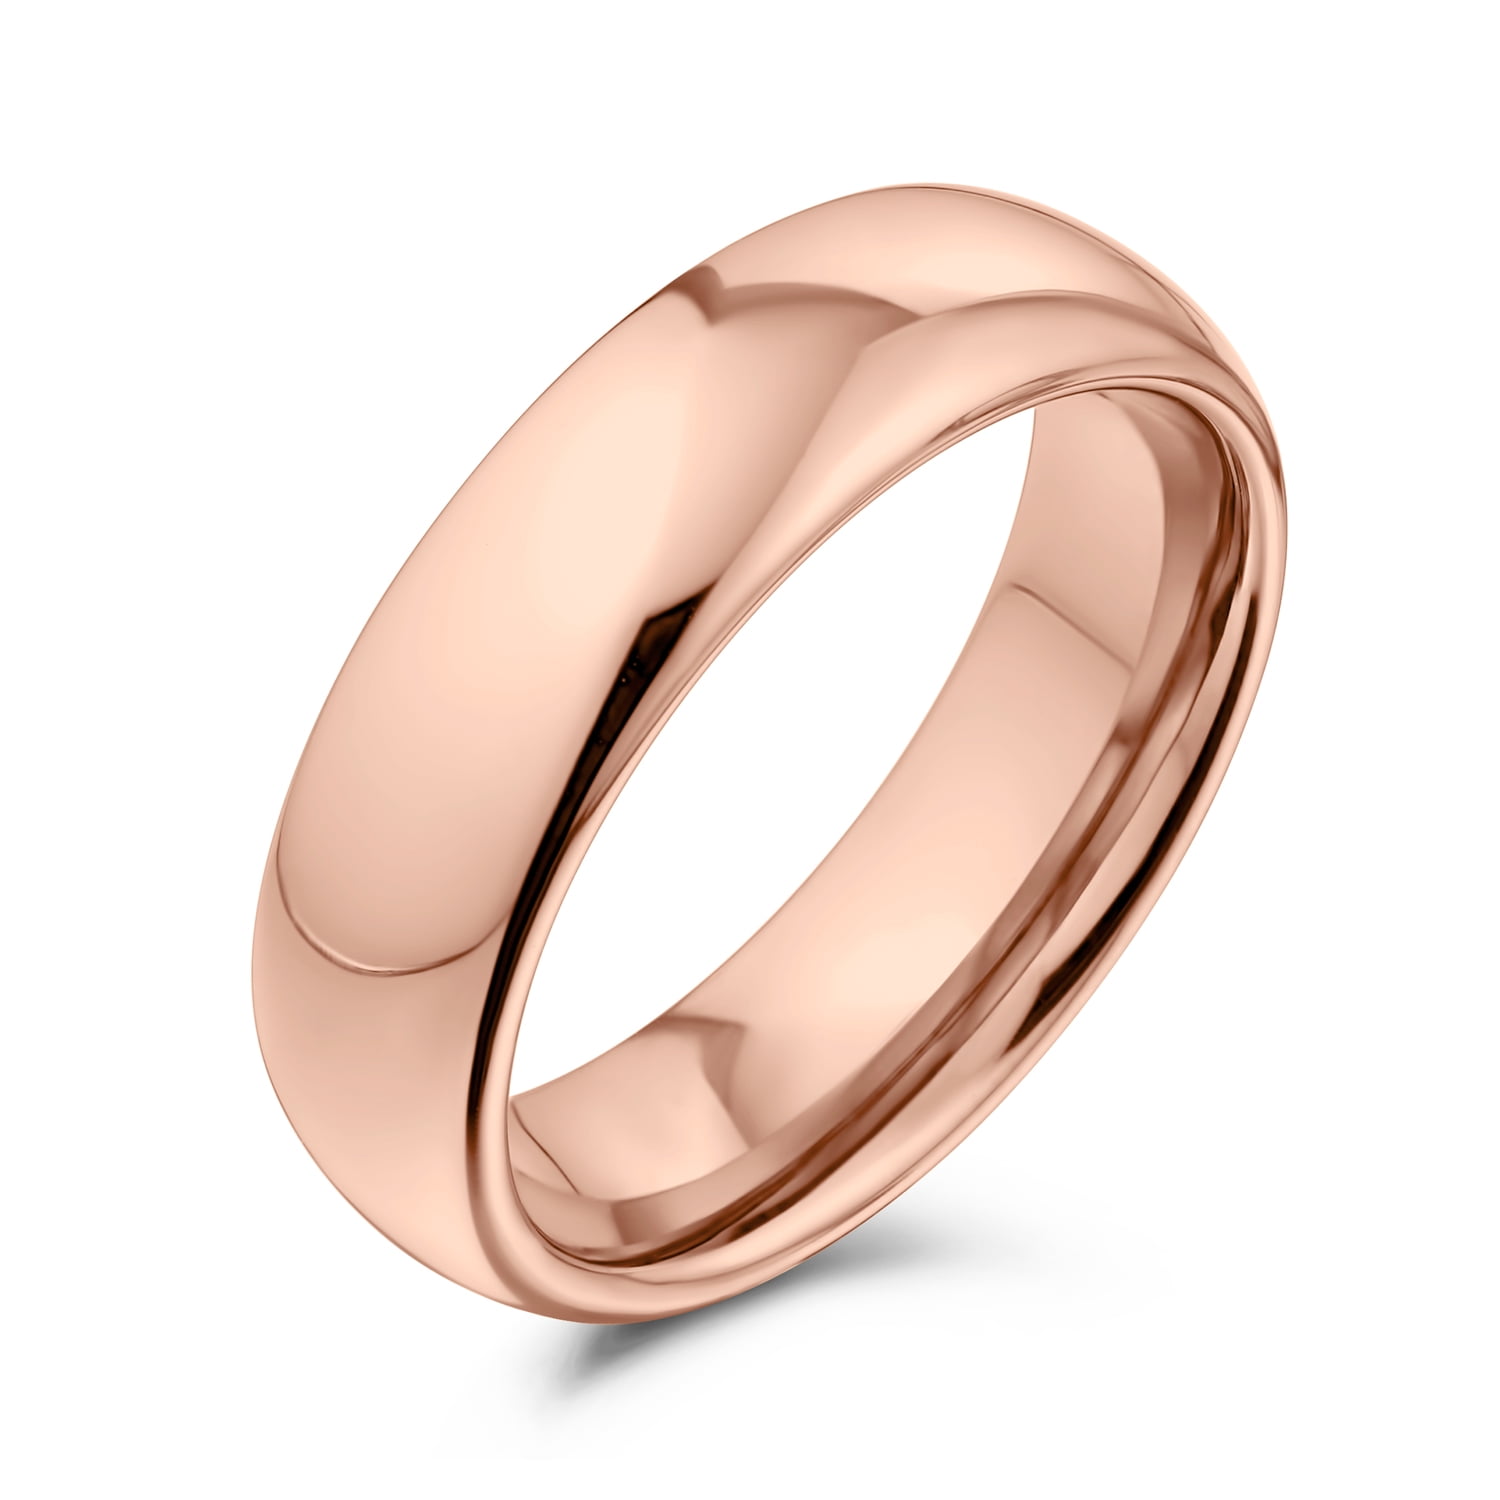 7 Women Ring Size 7.5 Gemini His & Hers Dome Comfort Fit Rose Gold Promise Wedding Titanium Ring Set Width 6mm & 4mm Men Ring Size